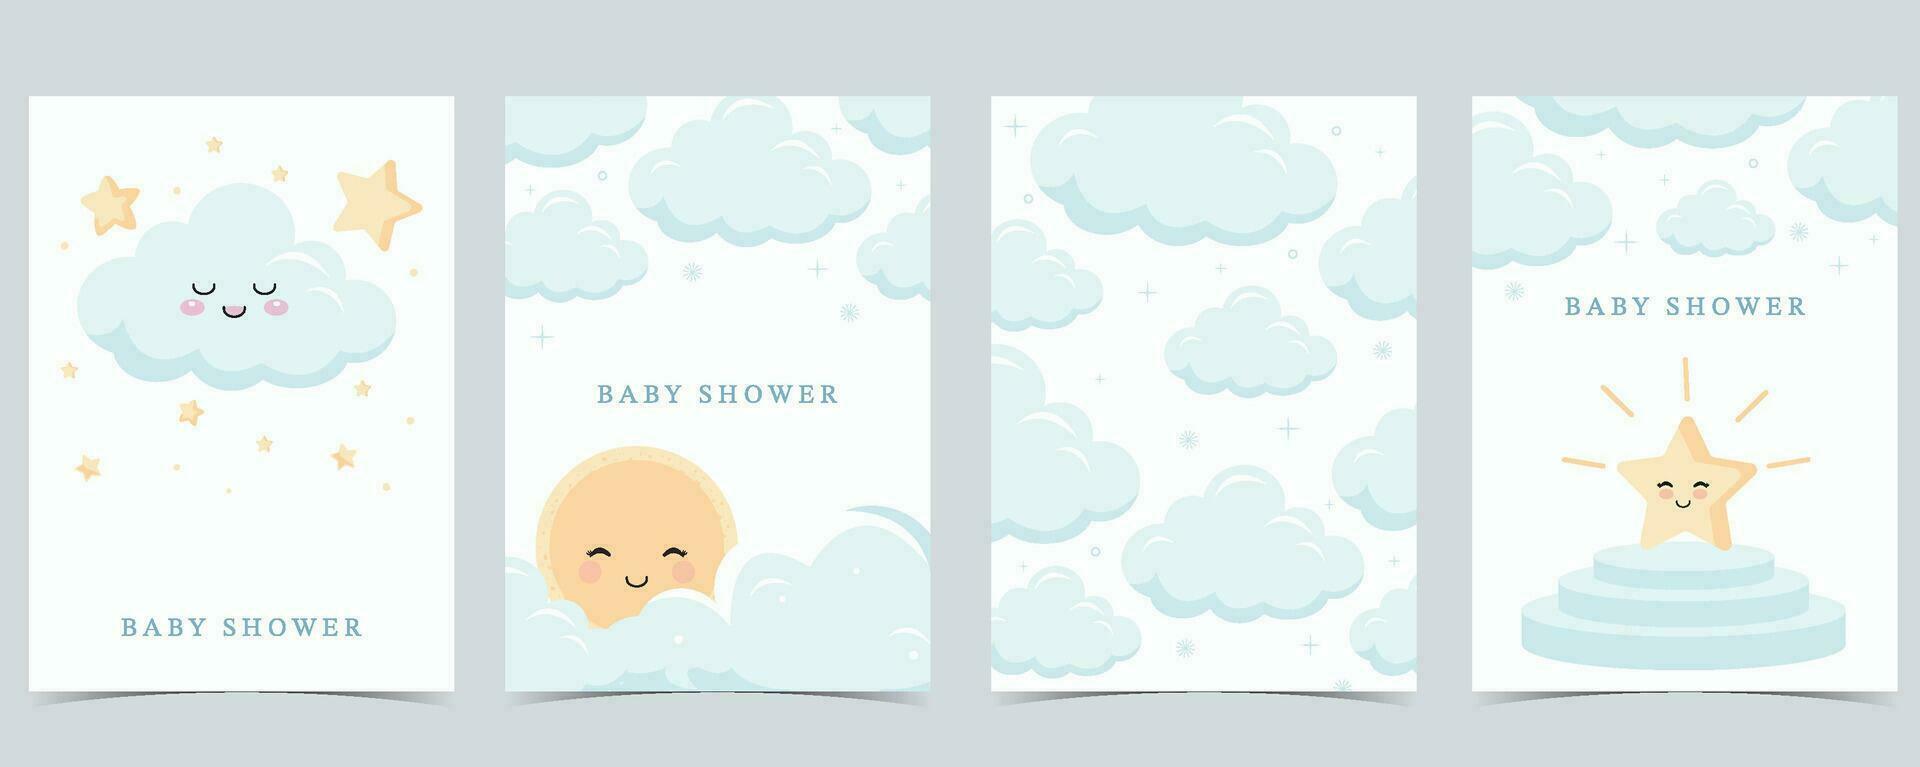 Baby shower invitation card for boy with balloon, cloud,sky, blue vector